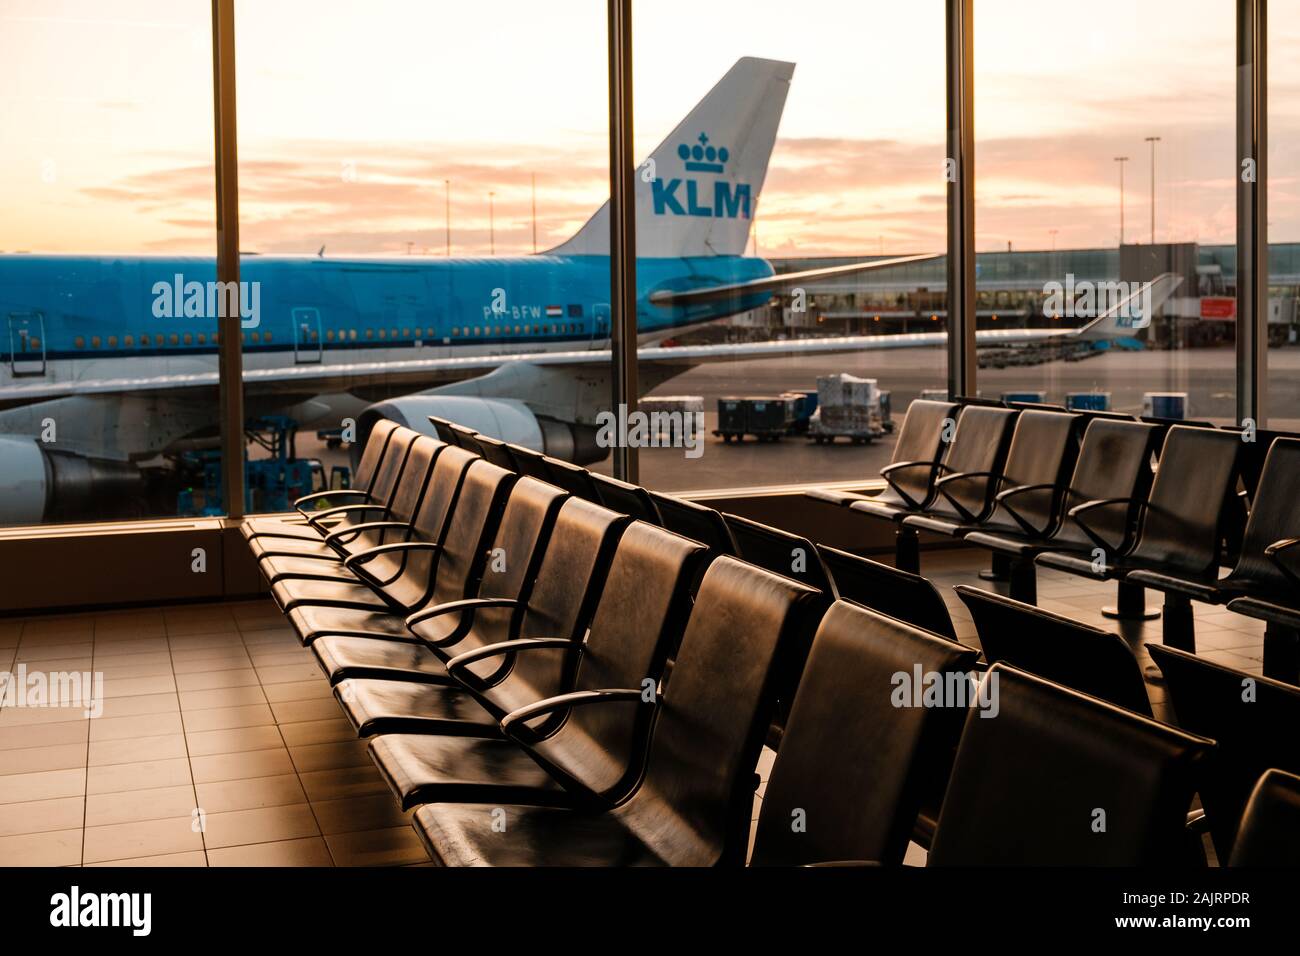 Amsterdam, Netherland - December, 2019: Empty seats in airport with KLM Airline airplane in background Stock Photo